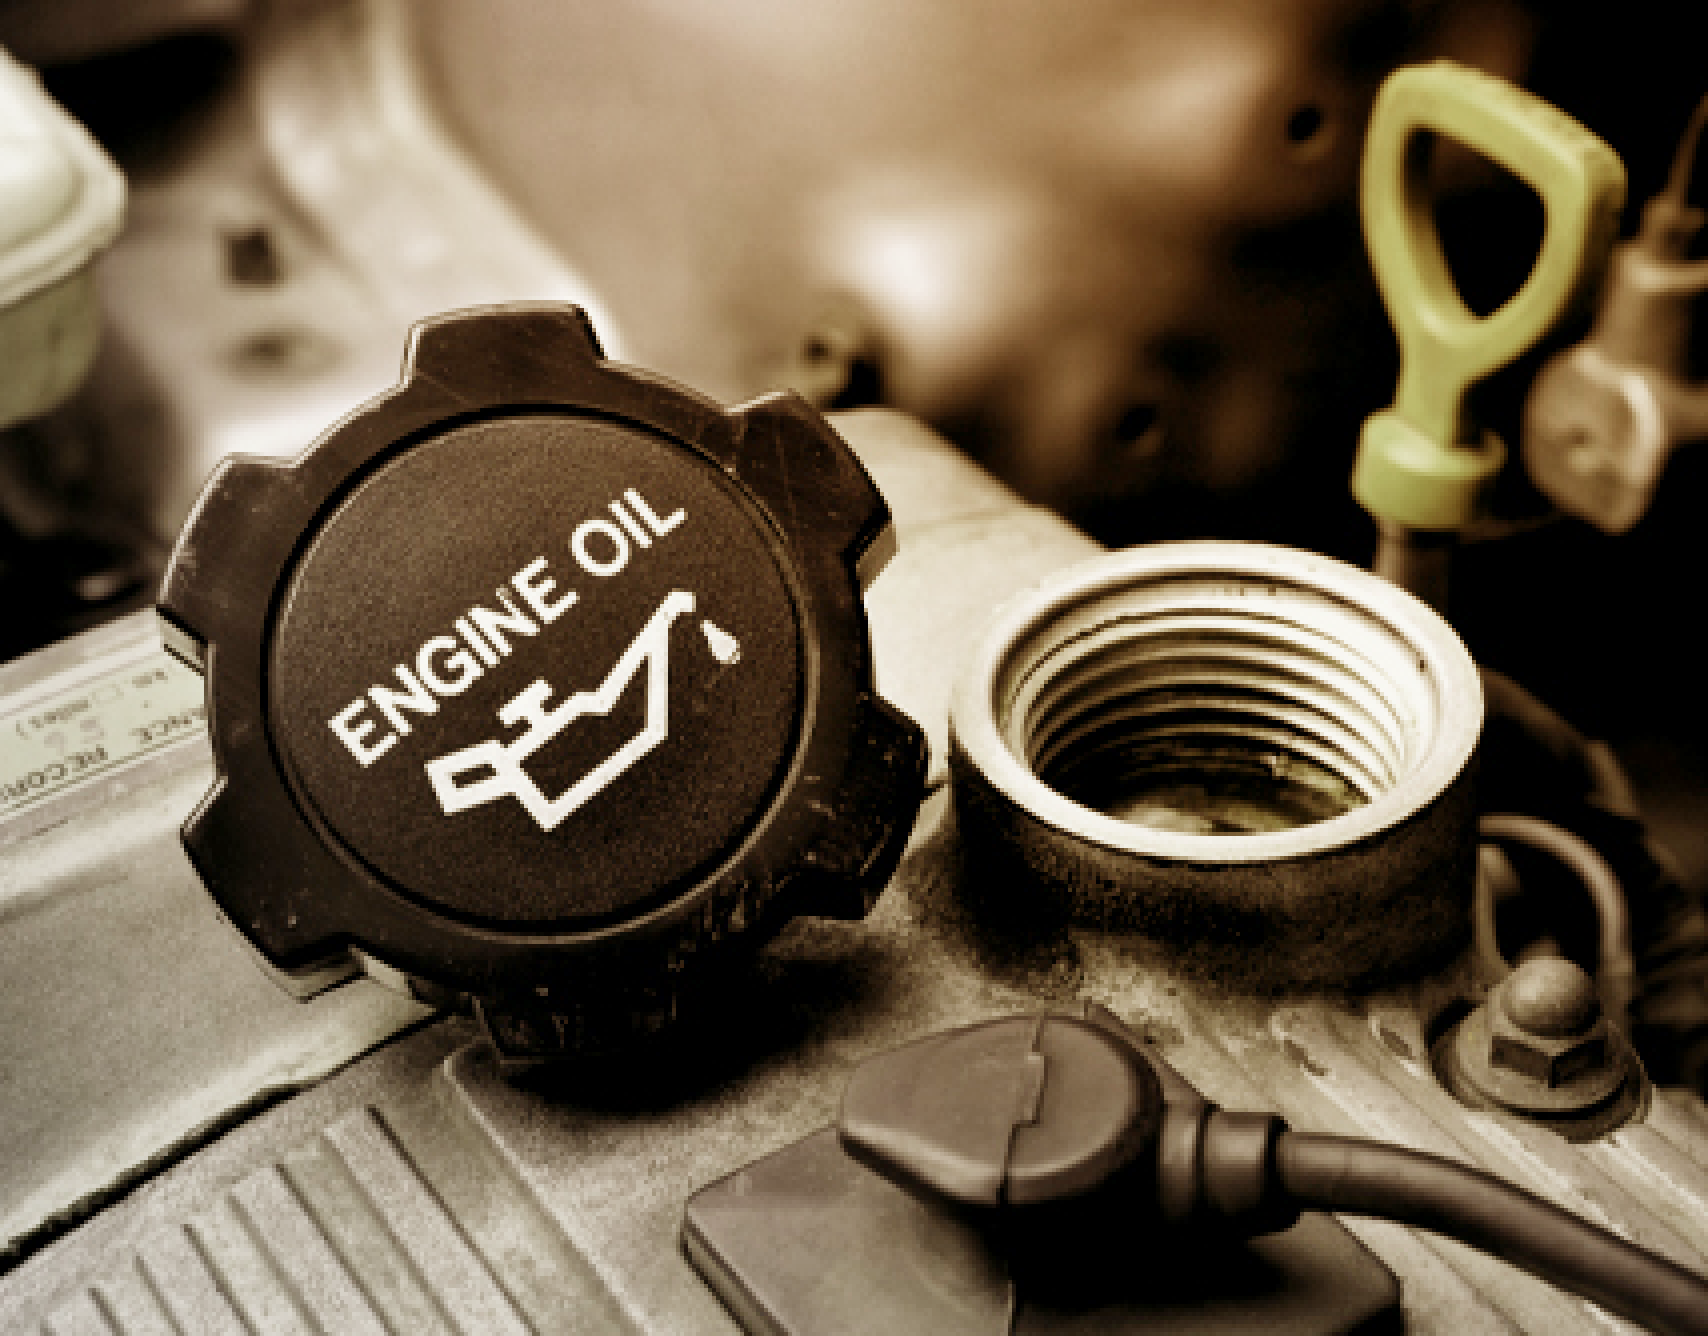 Tips for changing engine oil: how to do it better